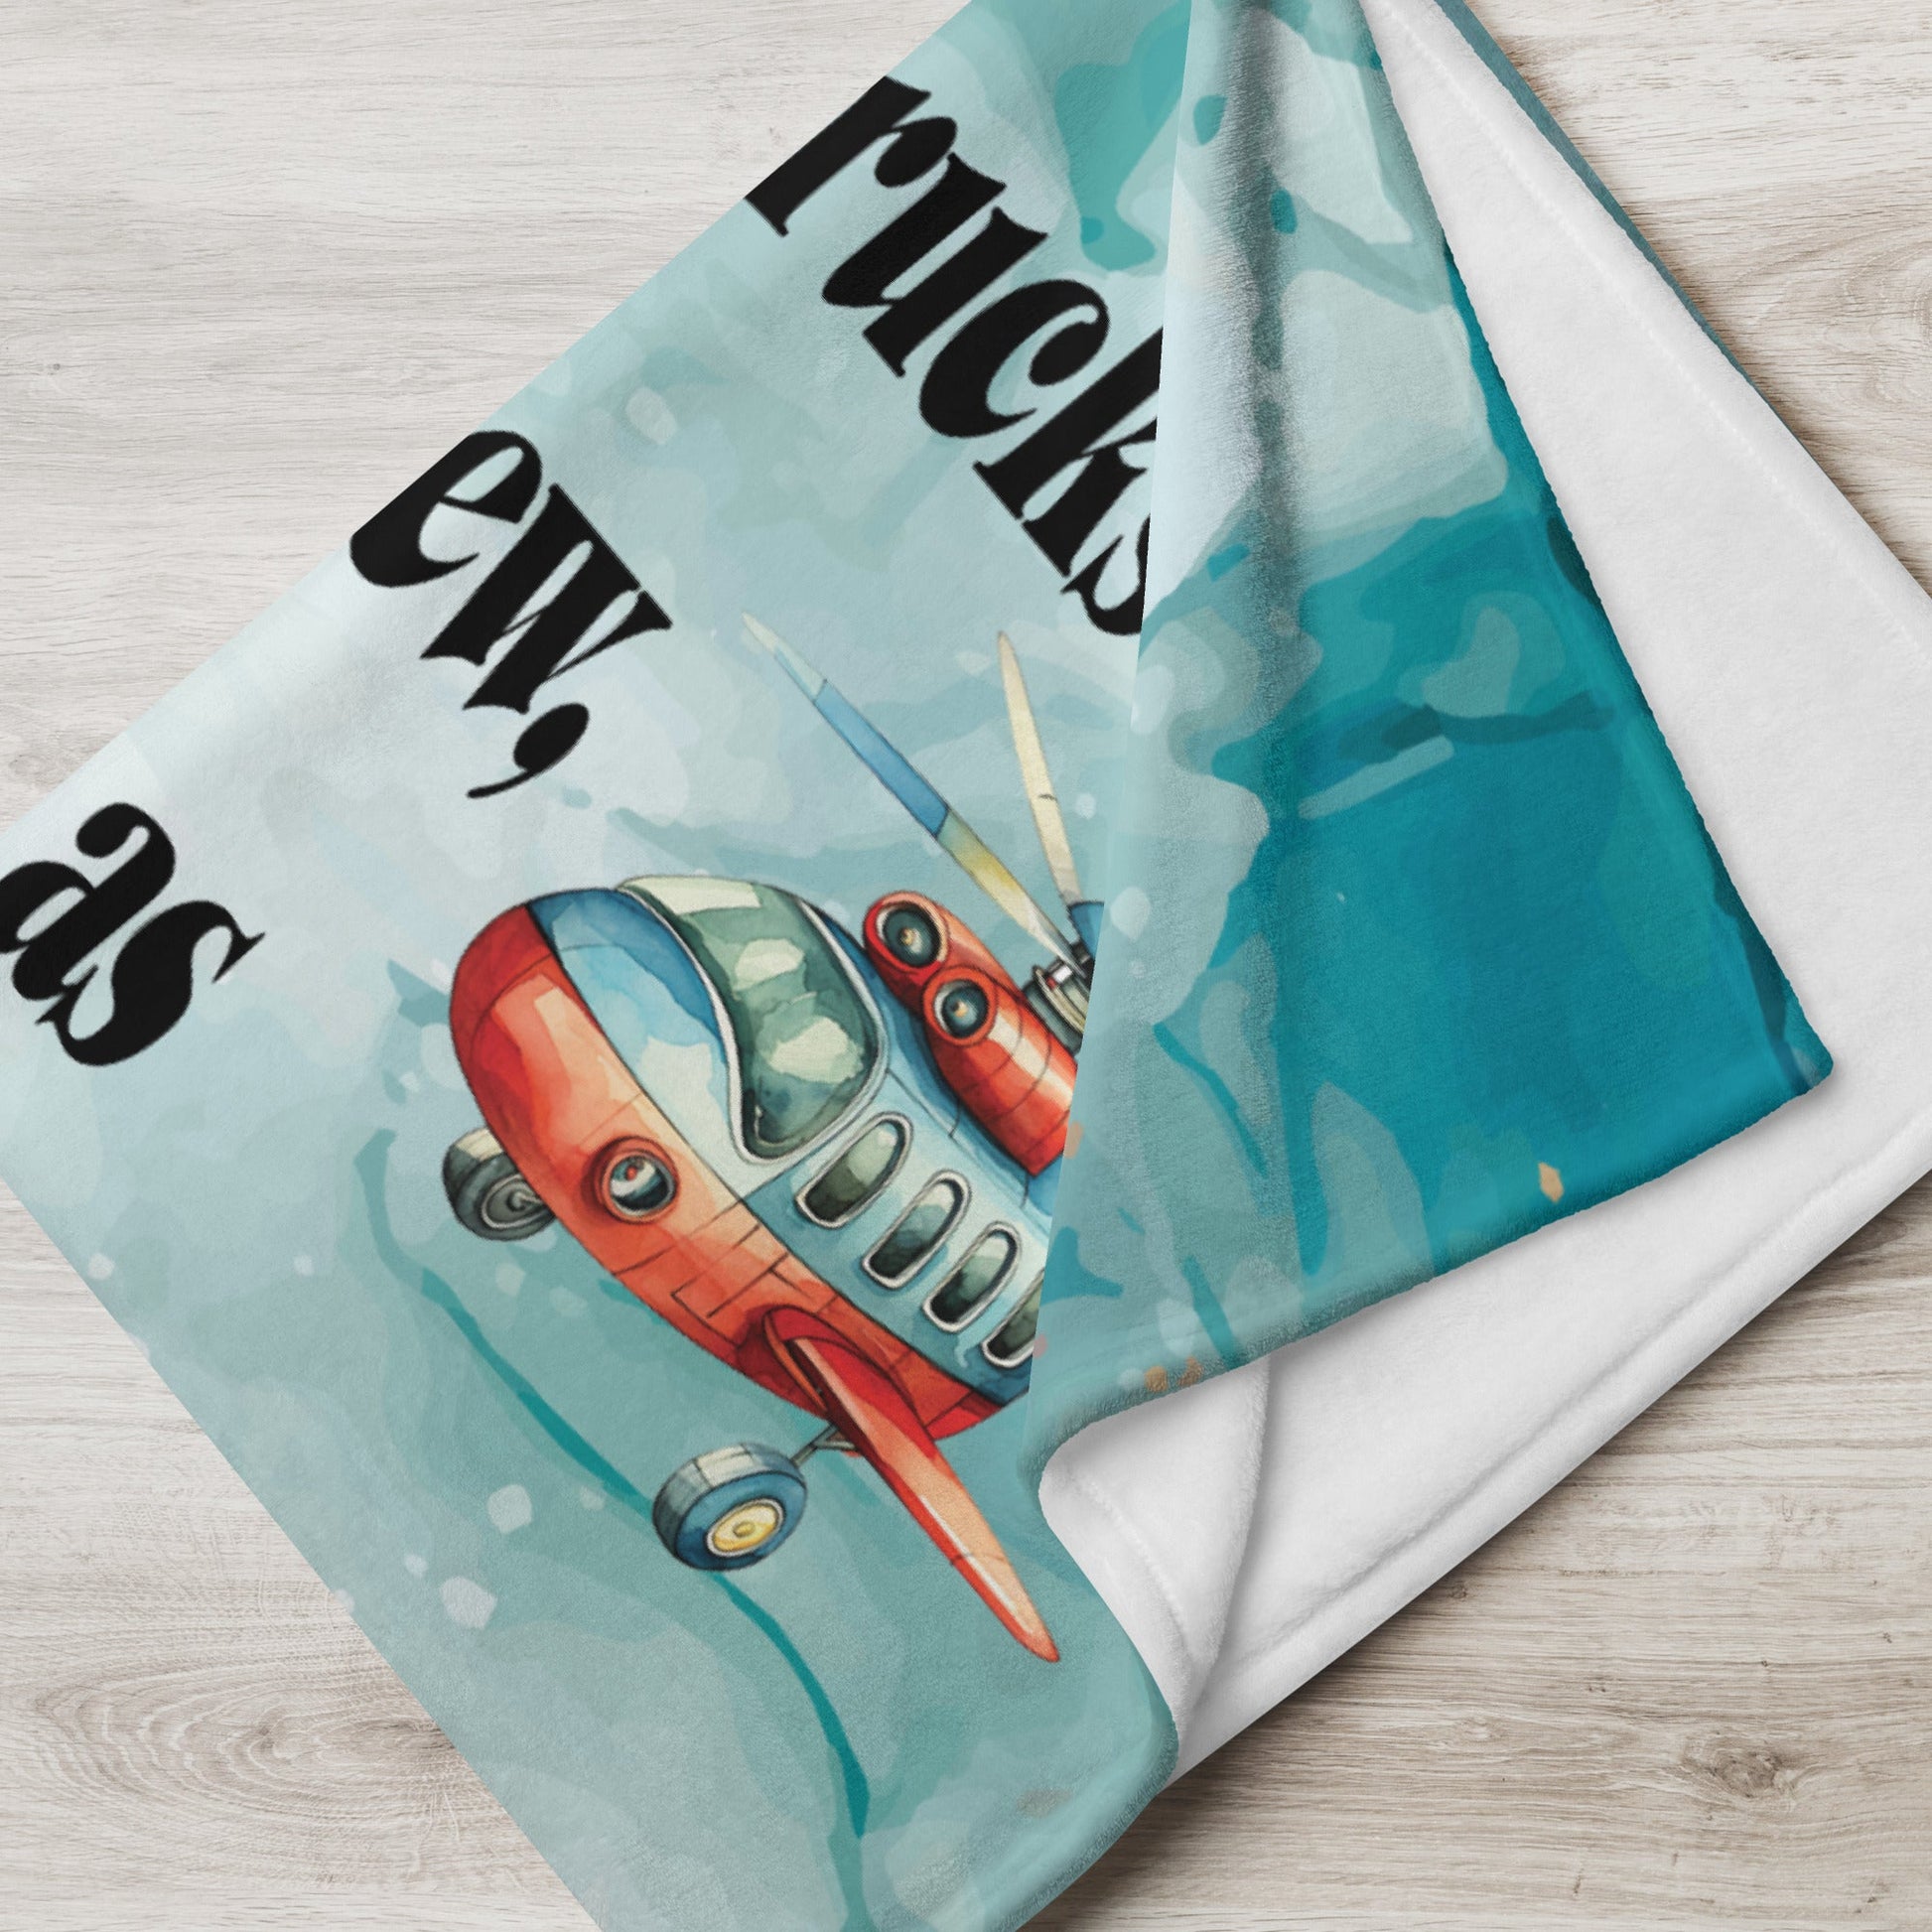 Planes Trains and Toys Blanket